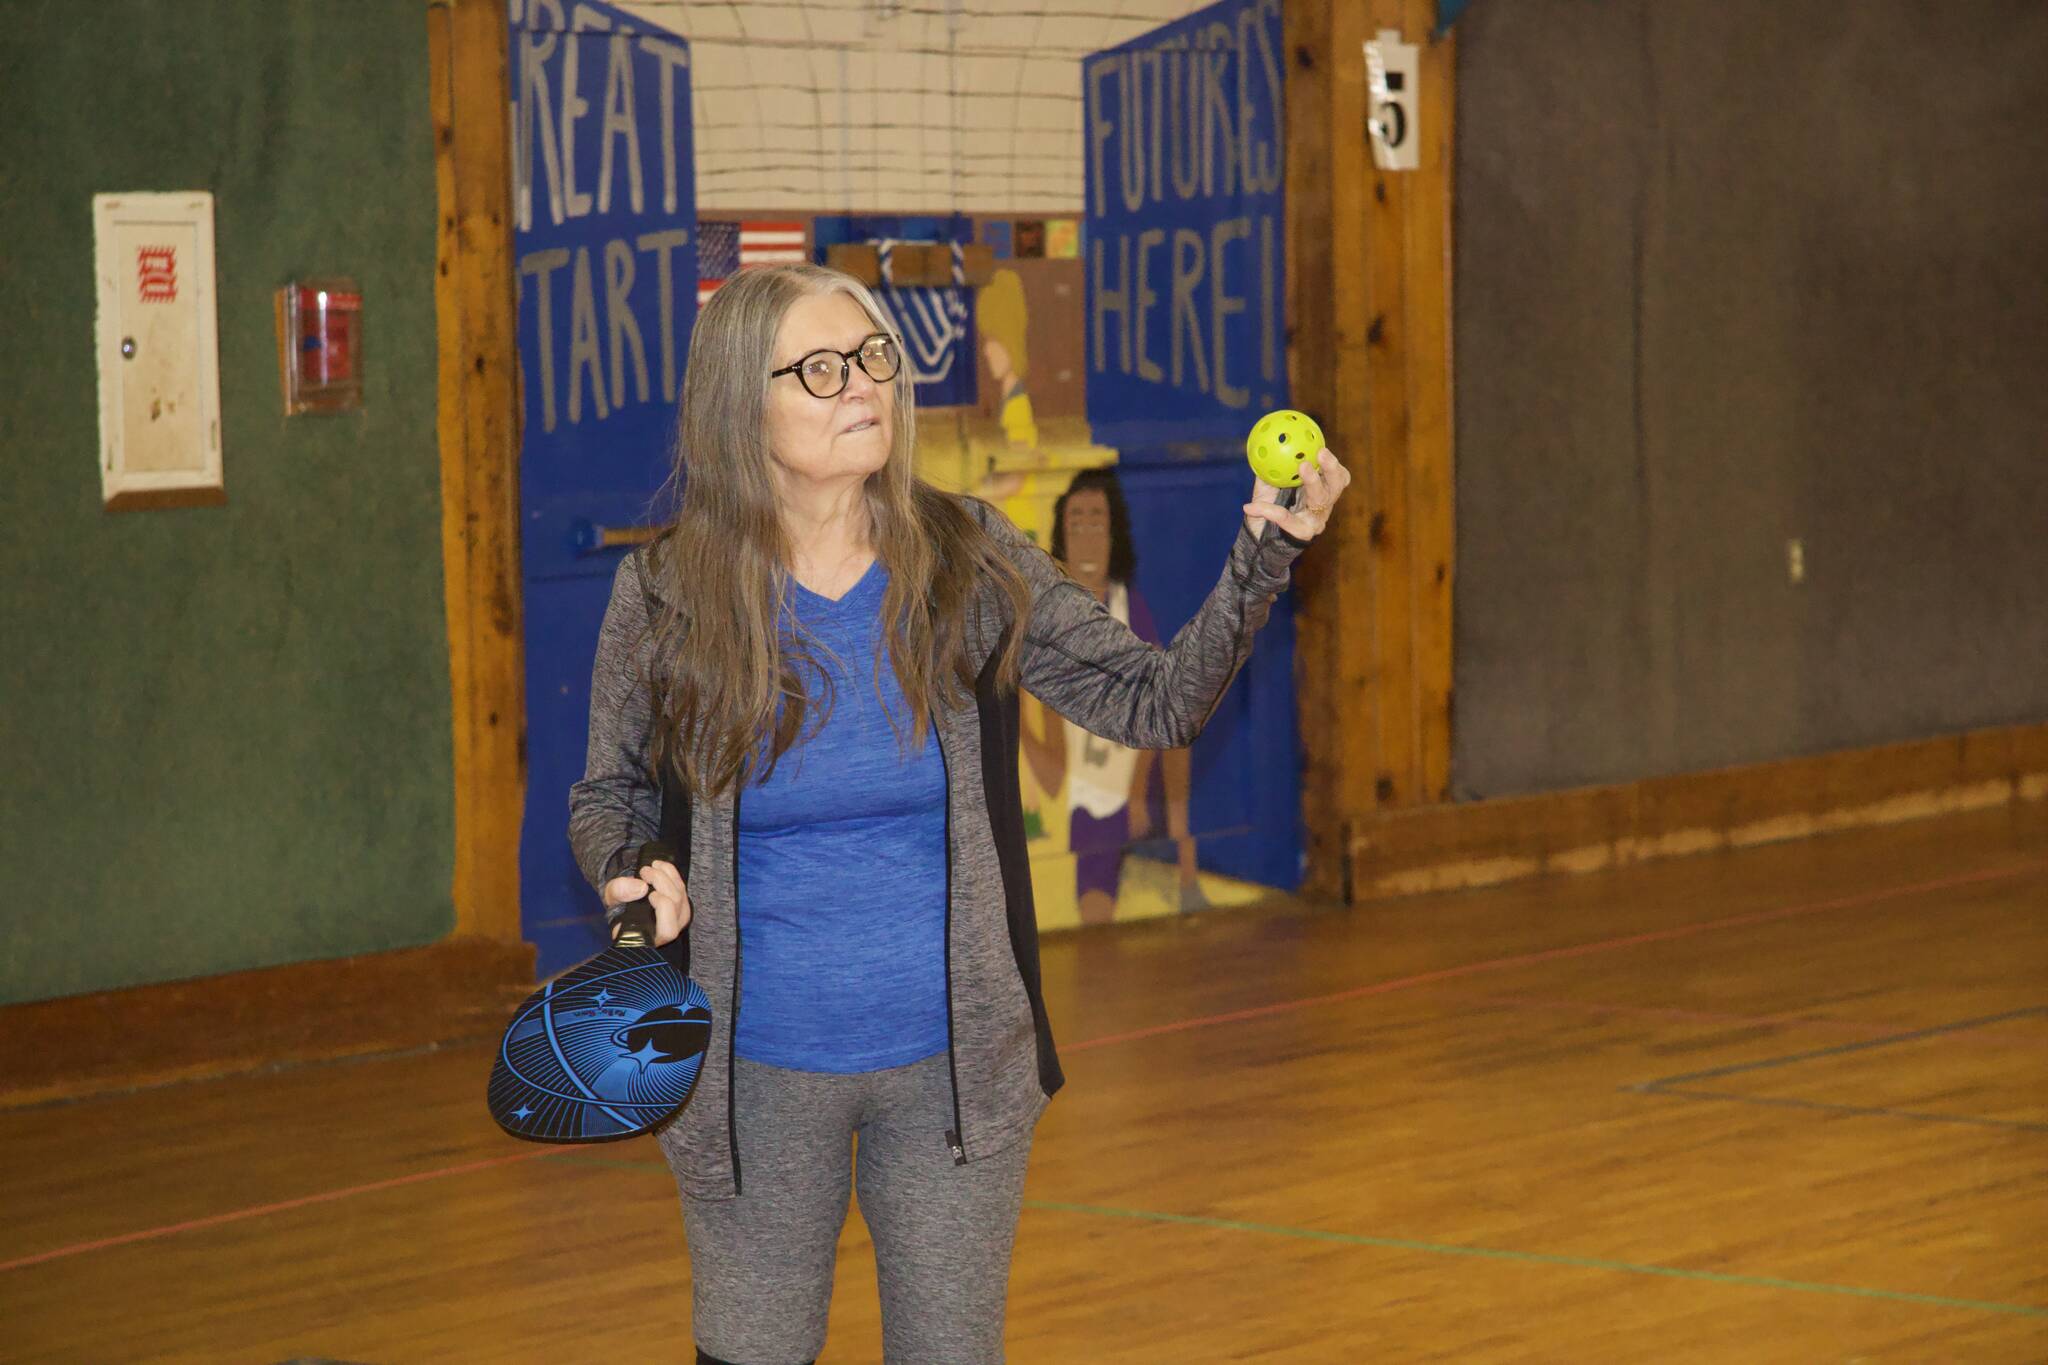 Photo by Rachel Rosen/Whidbey News-Times
Bobbie Vandeveer learns to play pickelball for the first time at the Roller Barn’s indoor courts.